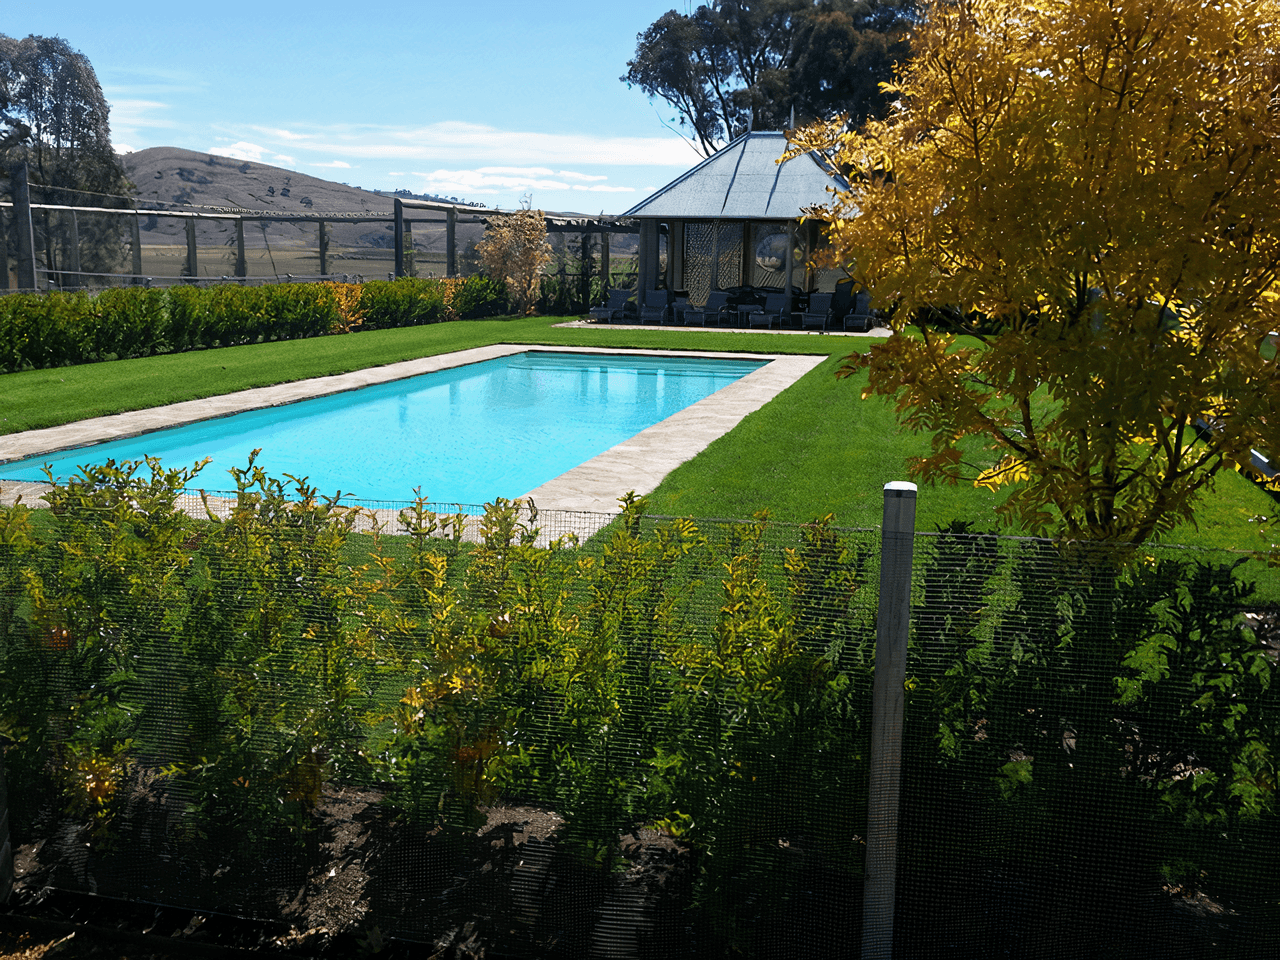 A lush garden bed and lawn surrounding an outdoor pool